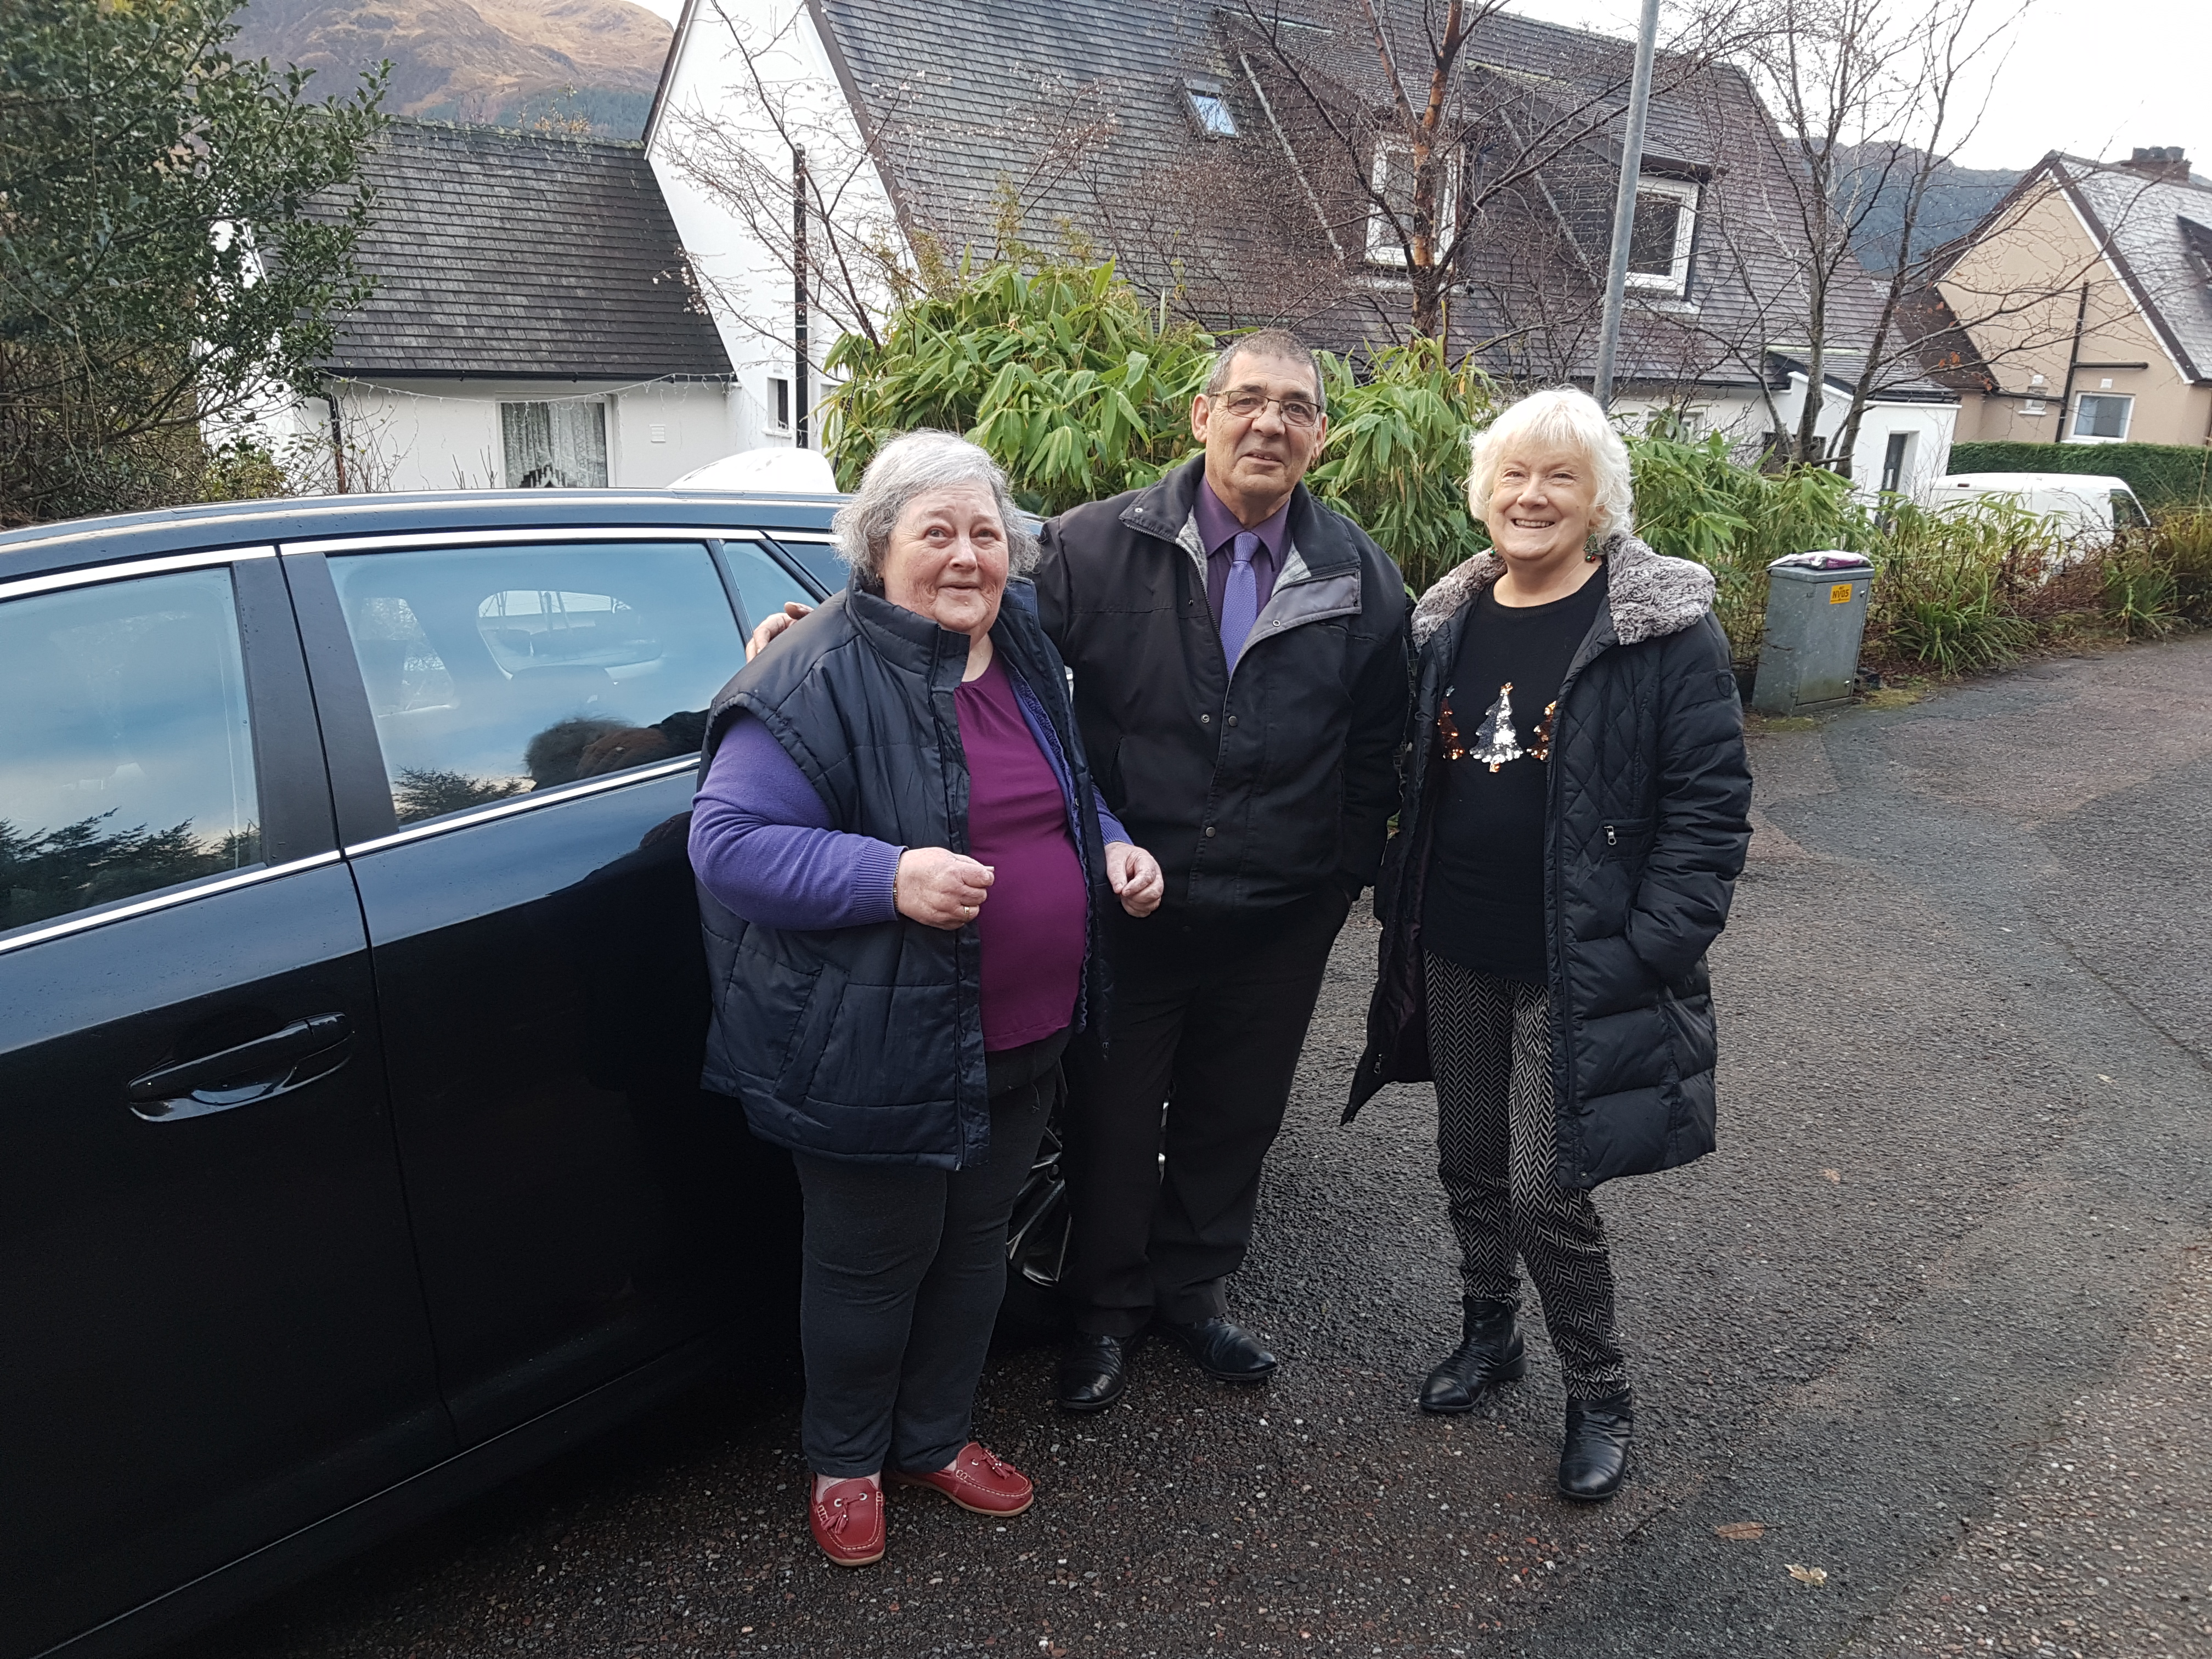 Kidney dialysis patients Jean MacIntosh and Brenda Hamilton with their taxi driver